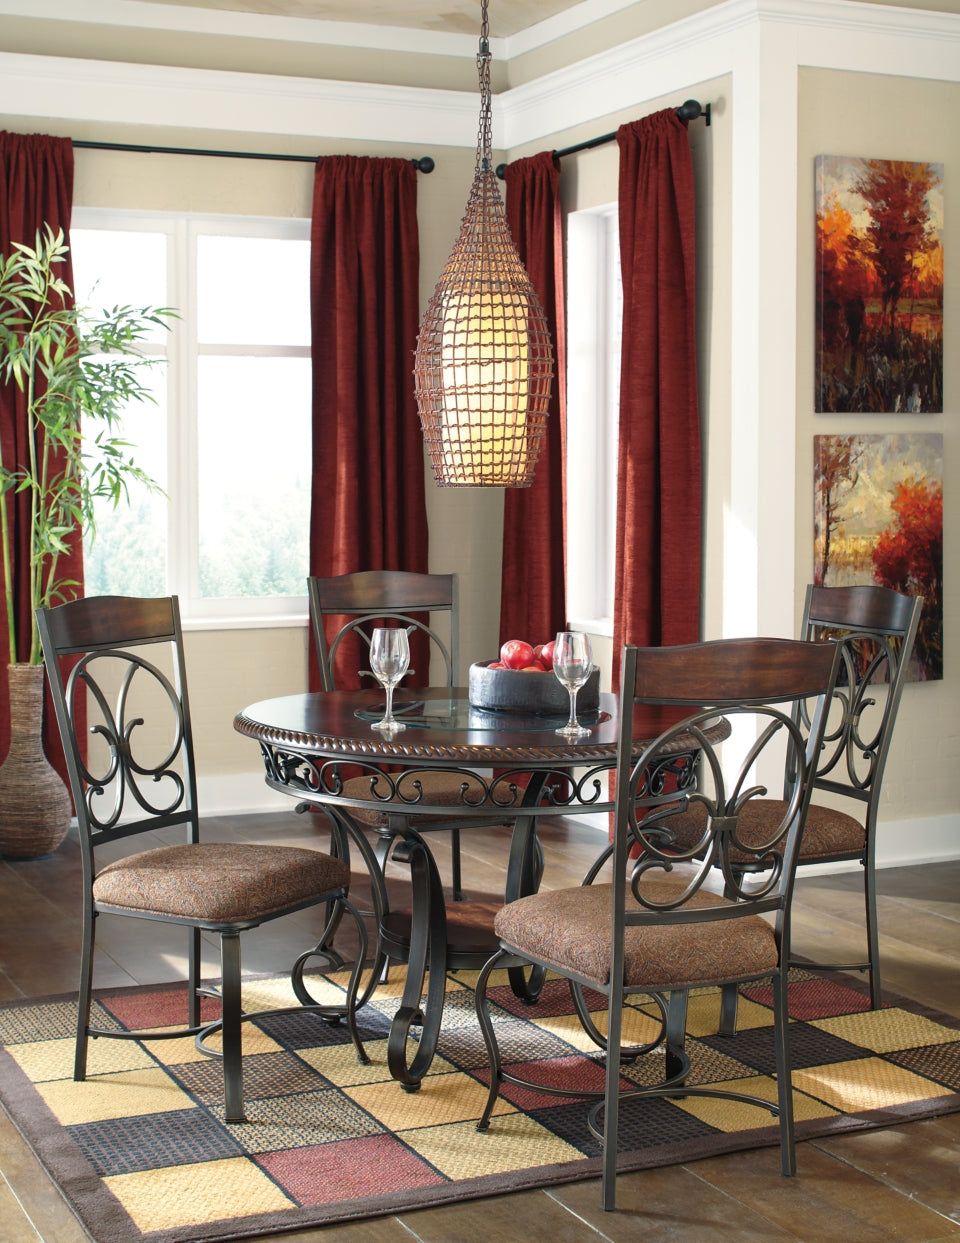 Glambrey Dining Table - furniture place usa